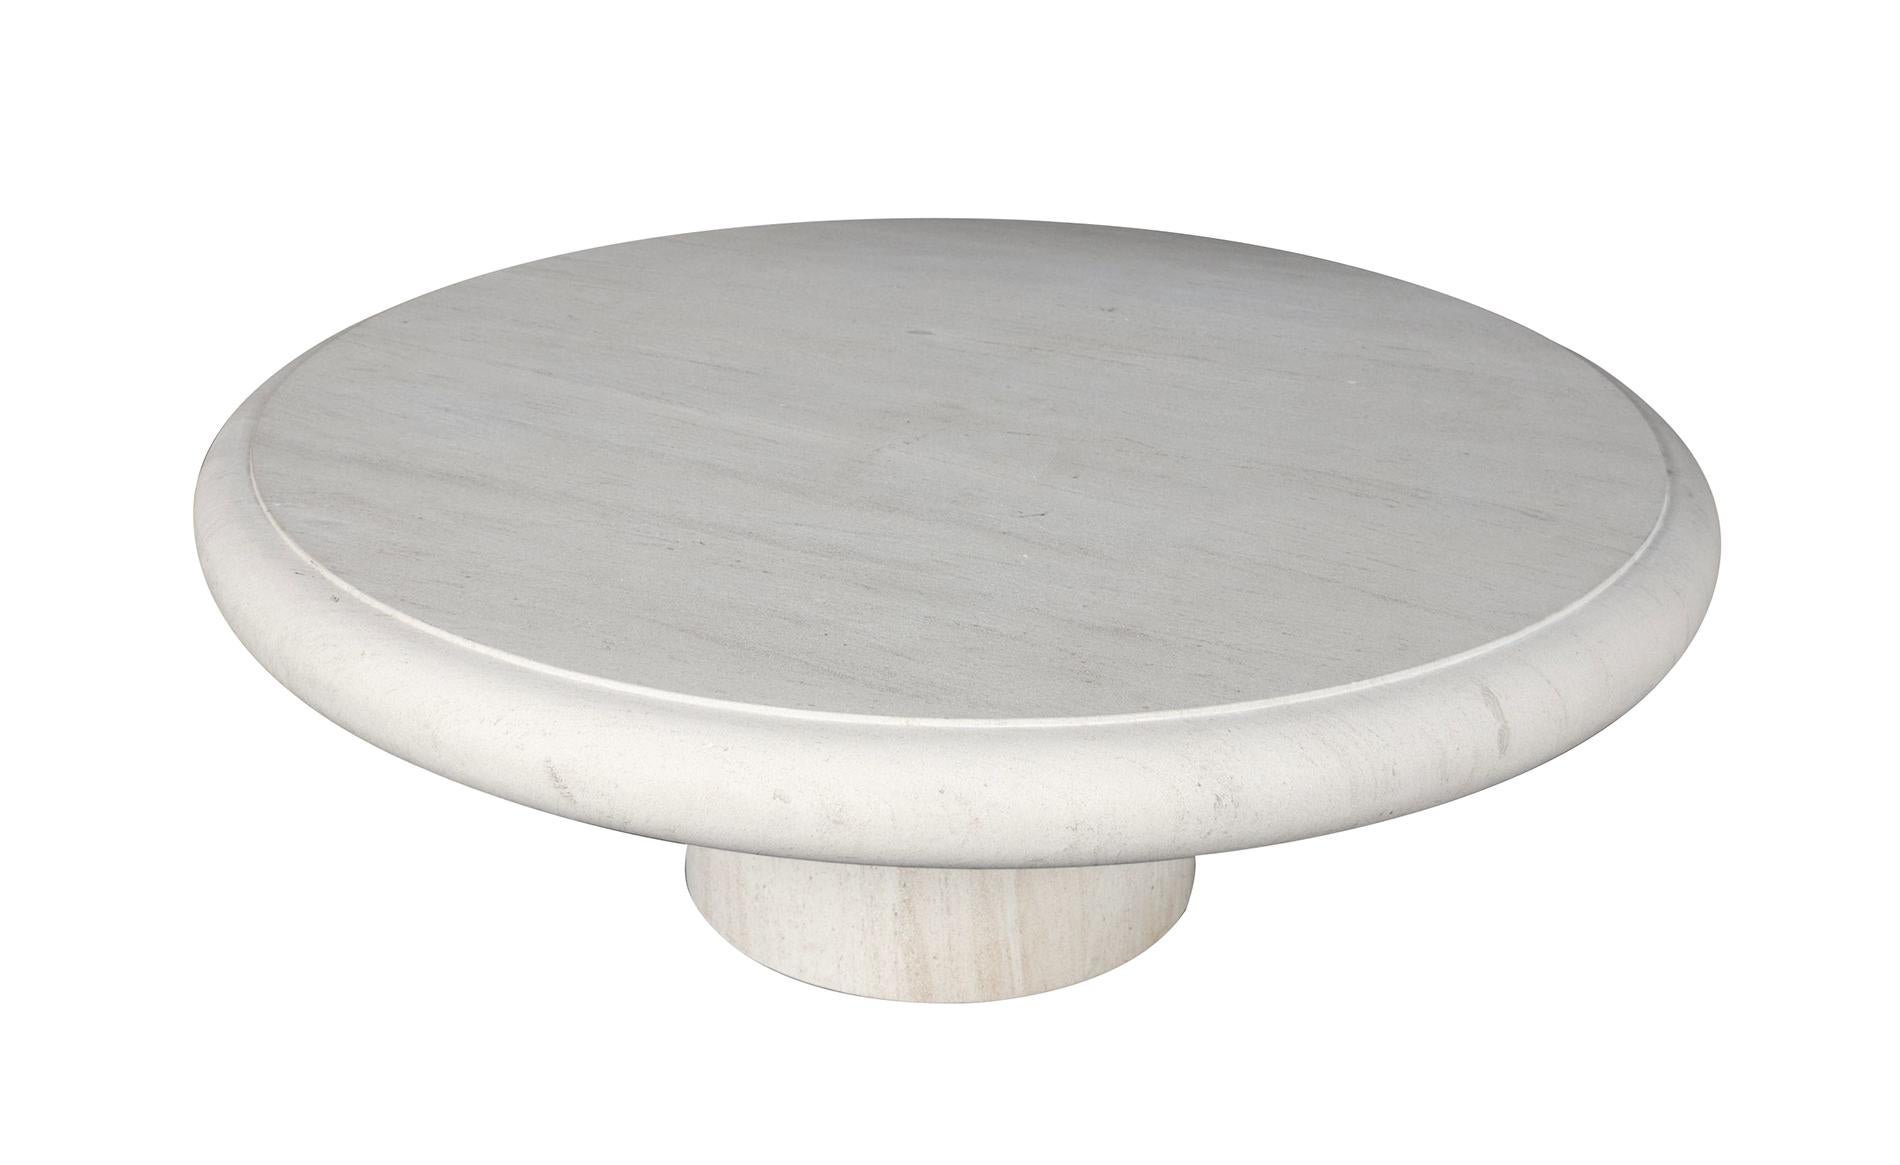 Made in France from French limestone, the table is comprised of a thick round top with bullnose edge and graduated circular base. New with only minimal wear expected; table is ideal for exterior or interior design projects. Due to the custom nature